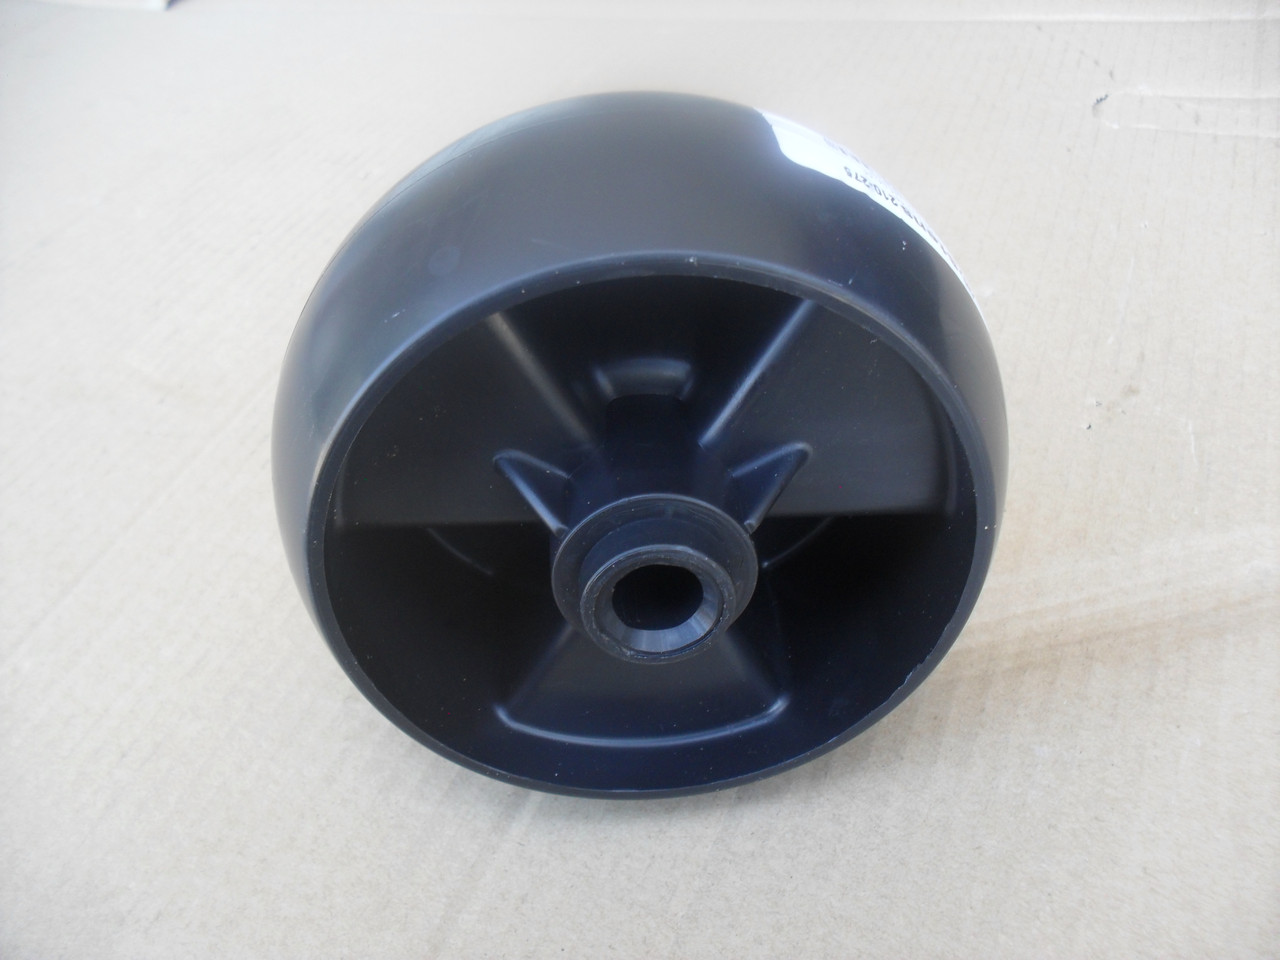 Deck Wheel for Toro GT2100, GT2200, GT2300, LX427, LX423, LX468, LX500, SL500, 1120677, 112-0677, Made In USA, 5" Tall x 2-3/4" Wide, Includes Grease Fitting